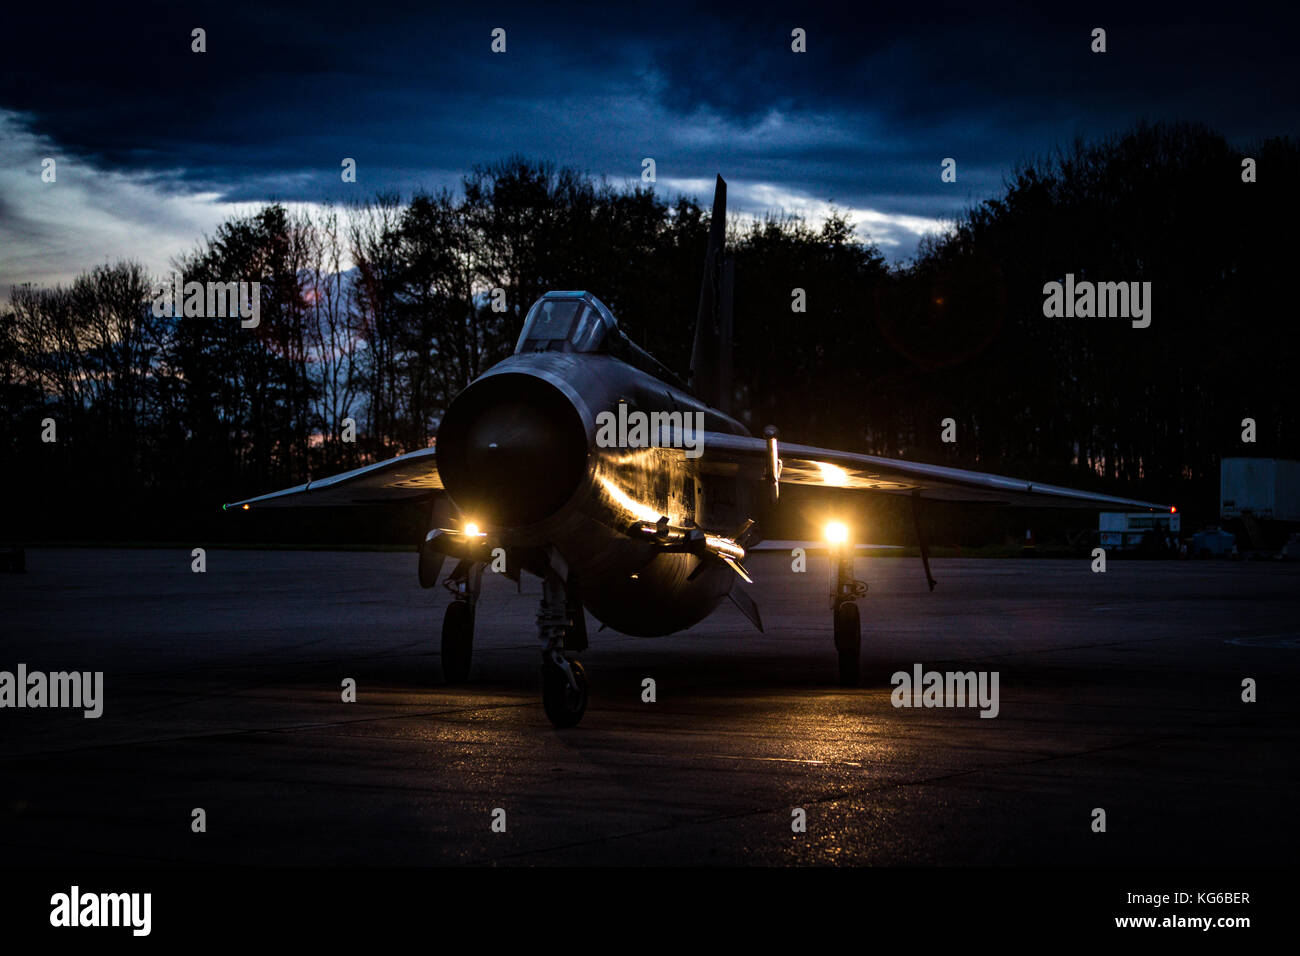 English Electric Lightning aircraft shot at night as part of an evening event in November 2017, Bruntingthorpe, Leicestershire, UK Stock Photo